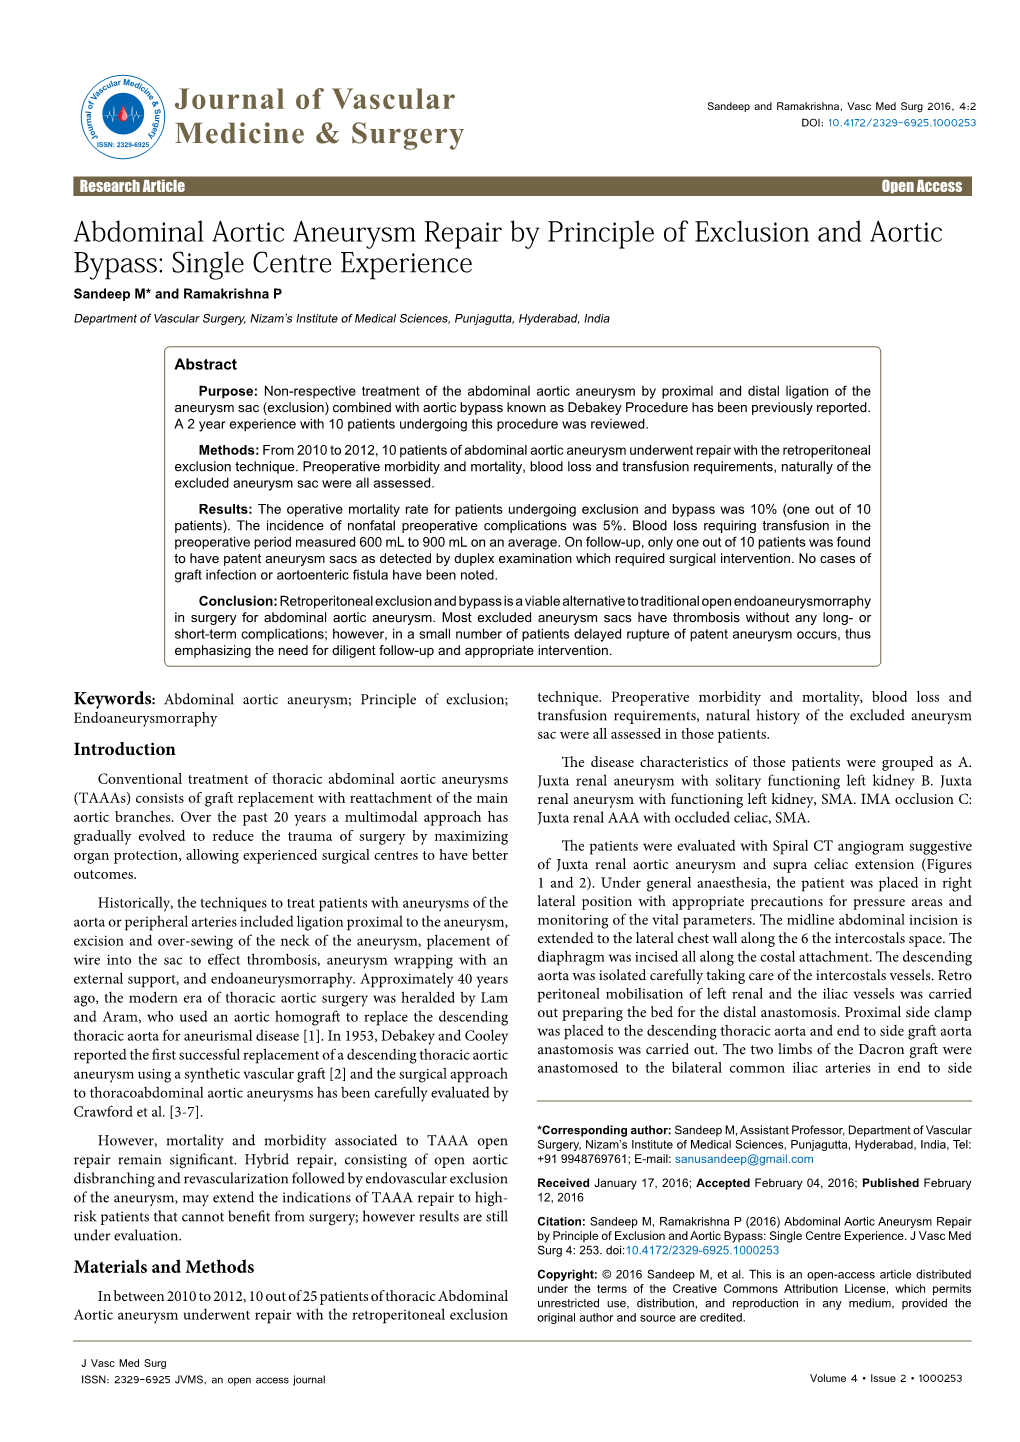 Abdominal Aortic Aneurysm Repair by Principle of Exclusion and Aortic Bypass